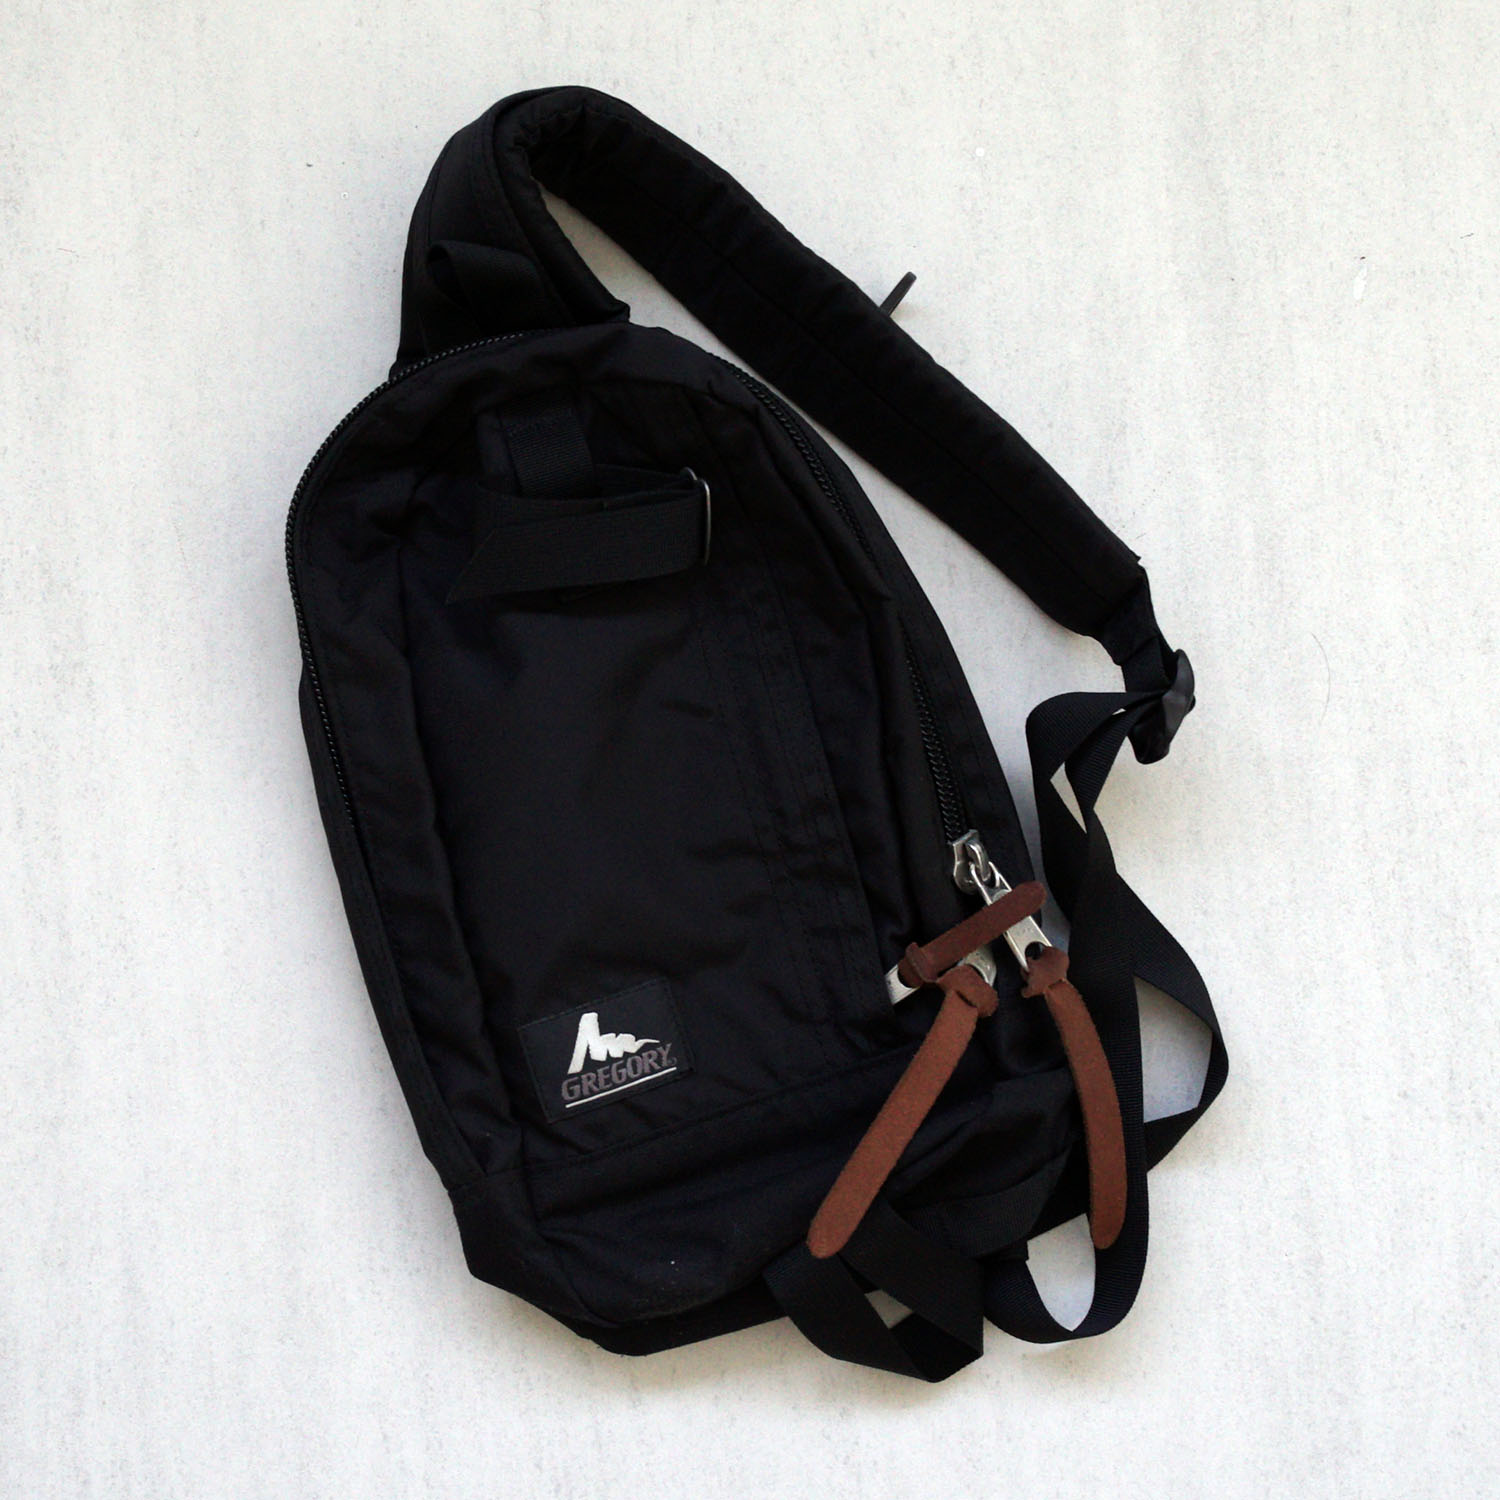 gregory switch sling bag